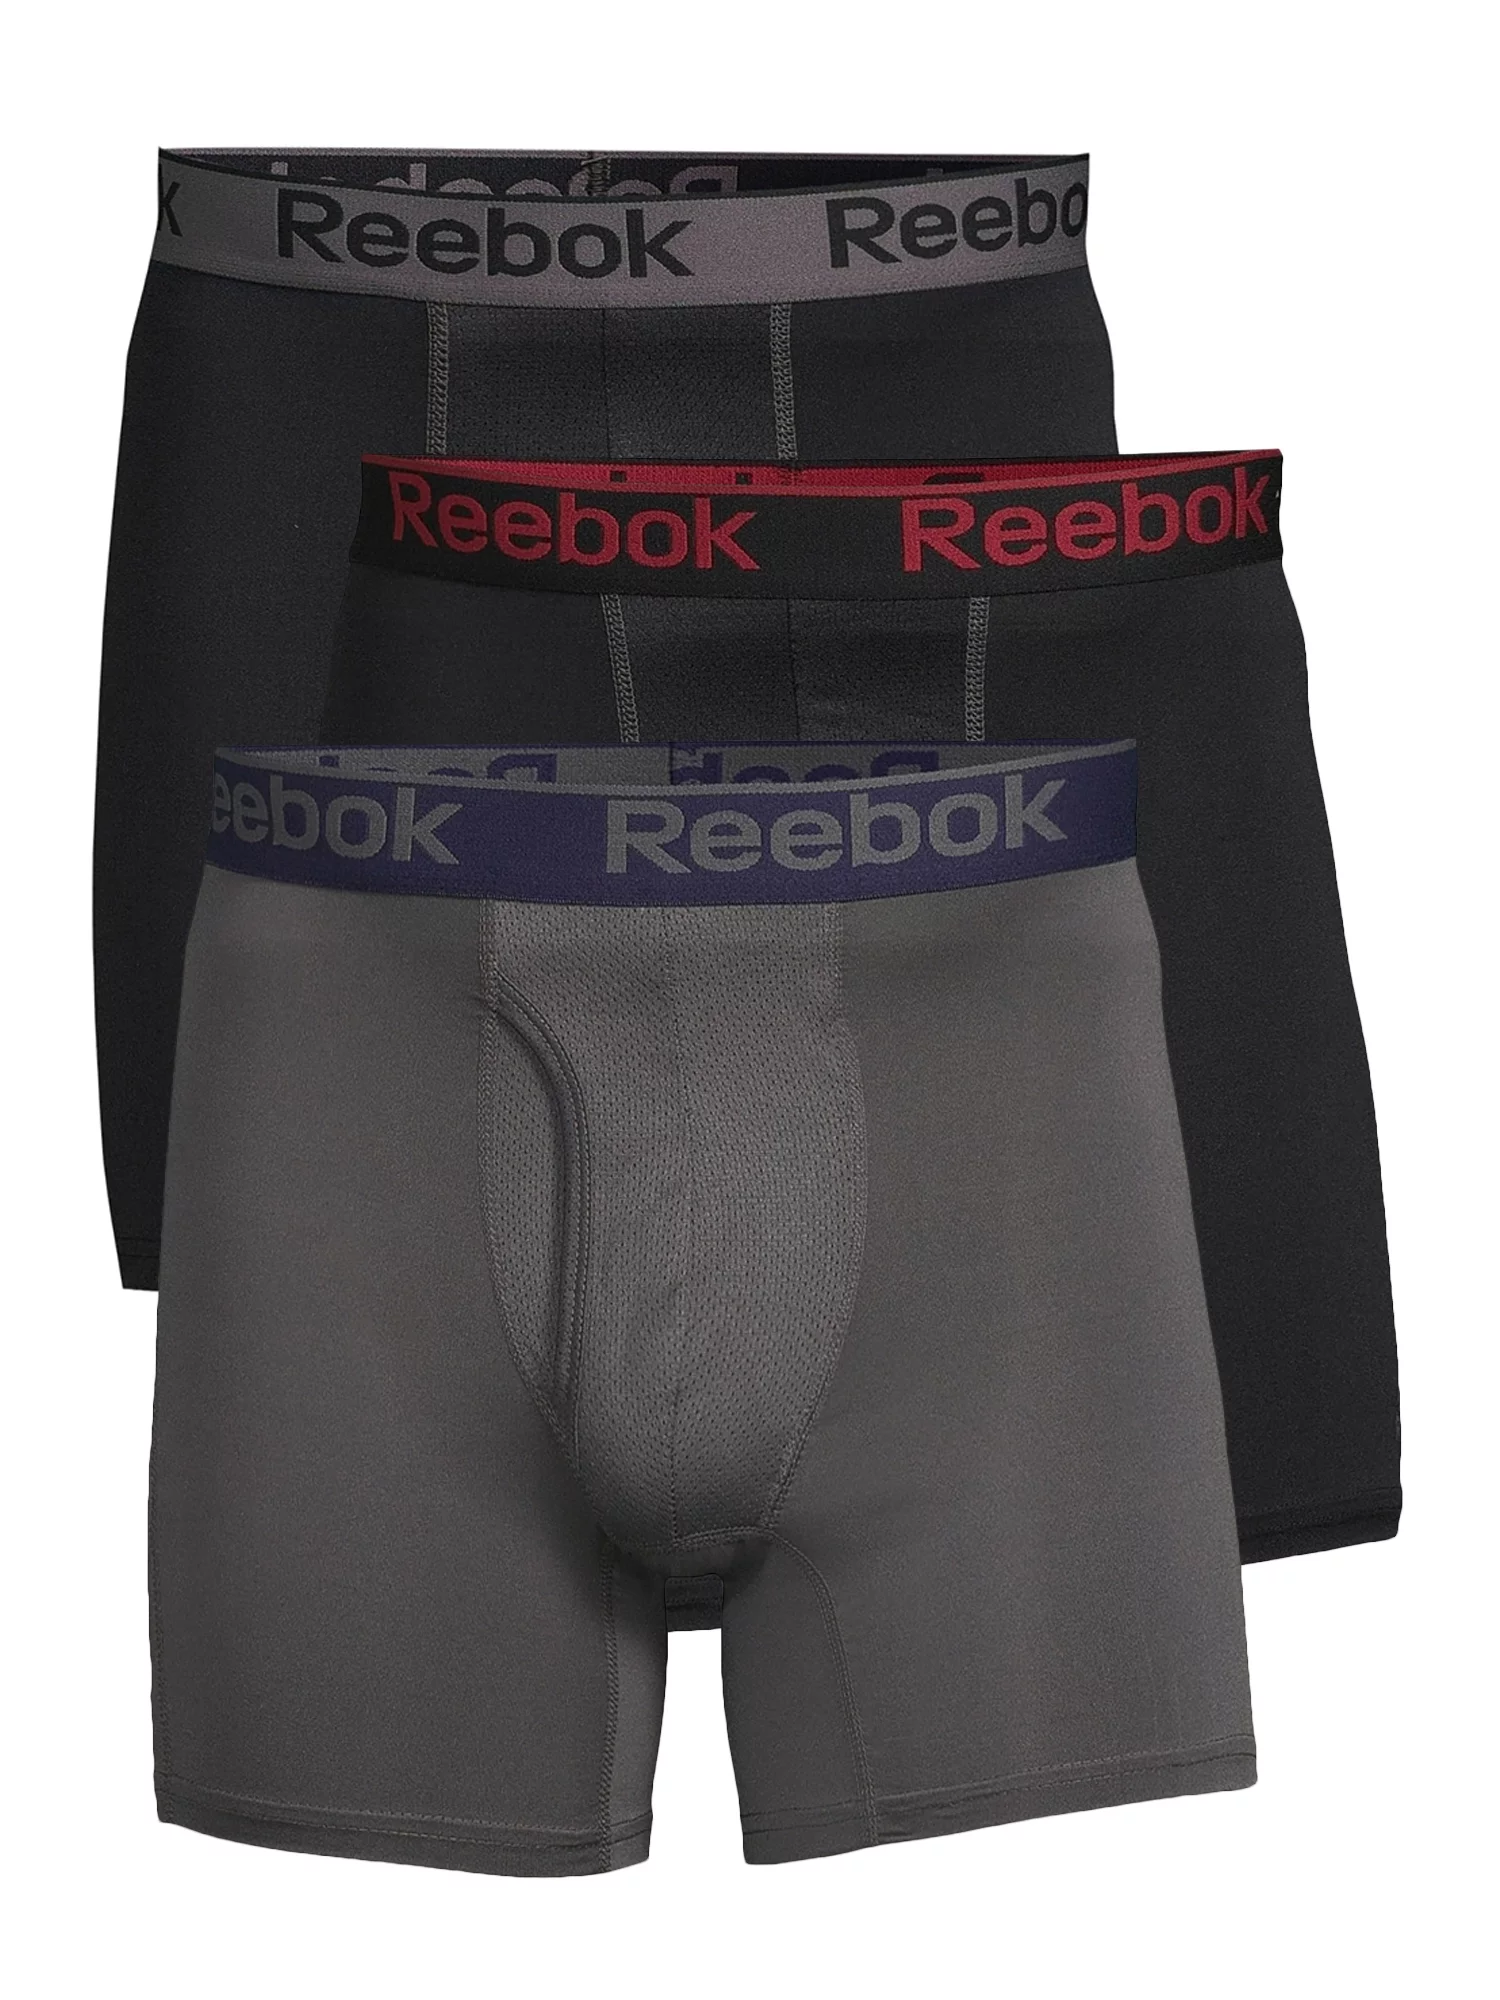 Reebok Men's Pro Series Performance Boxer Brief Extended Length Underwear, 7.5-Inch, 3-Pack